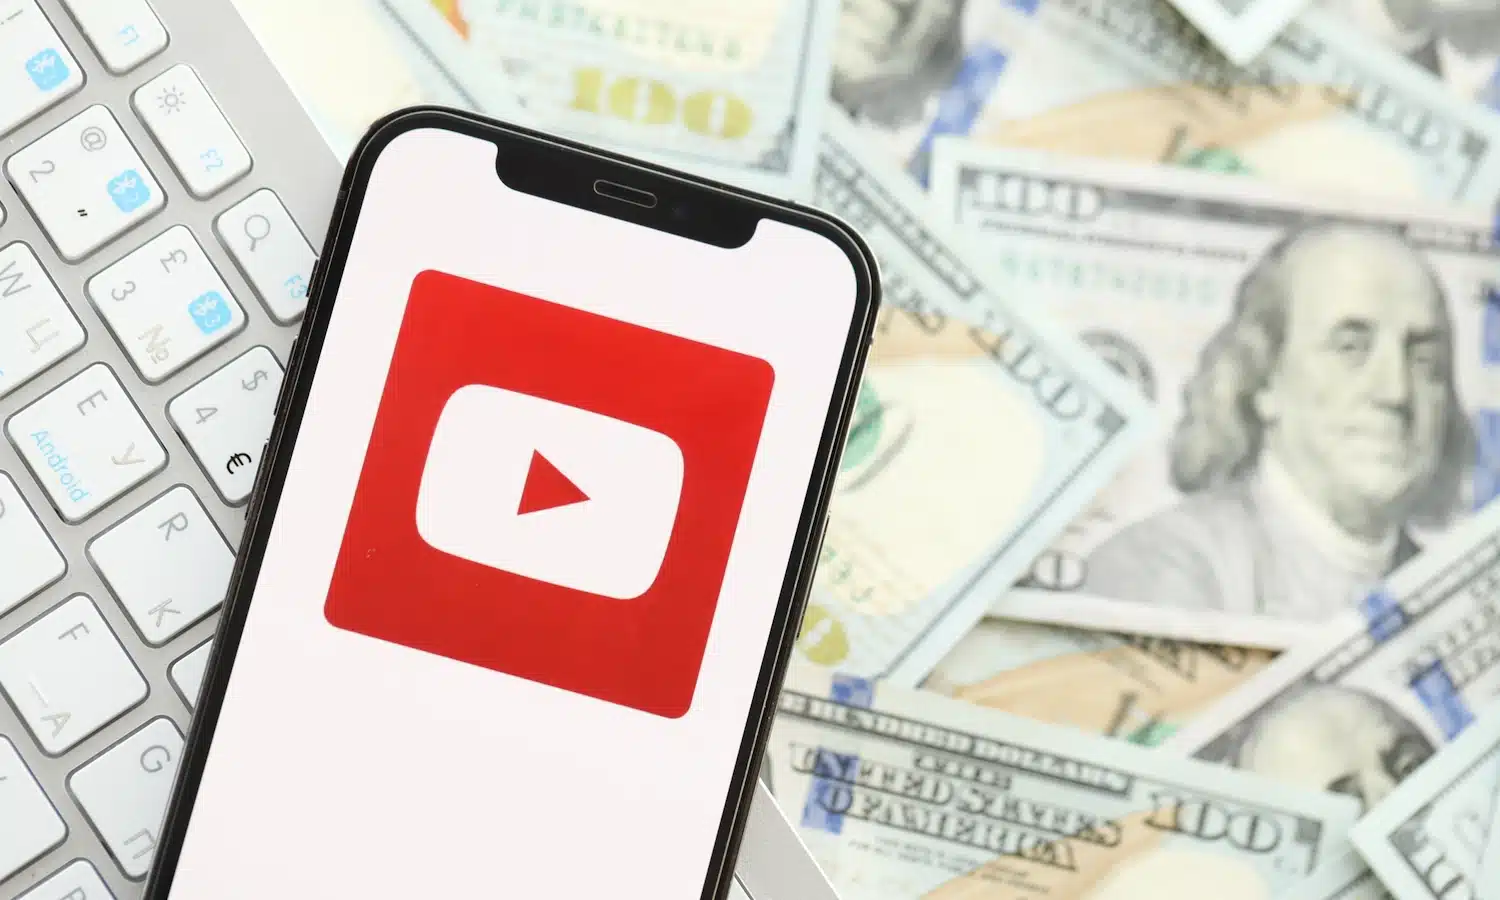 Google is making it more difficult to block ads on YouTube.